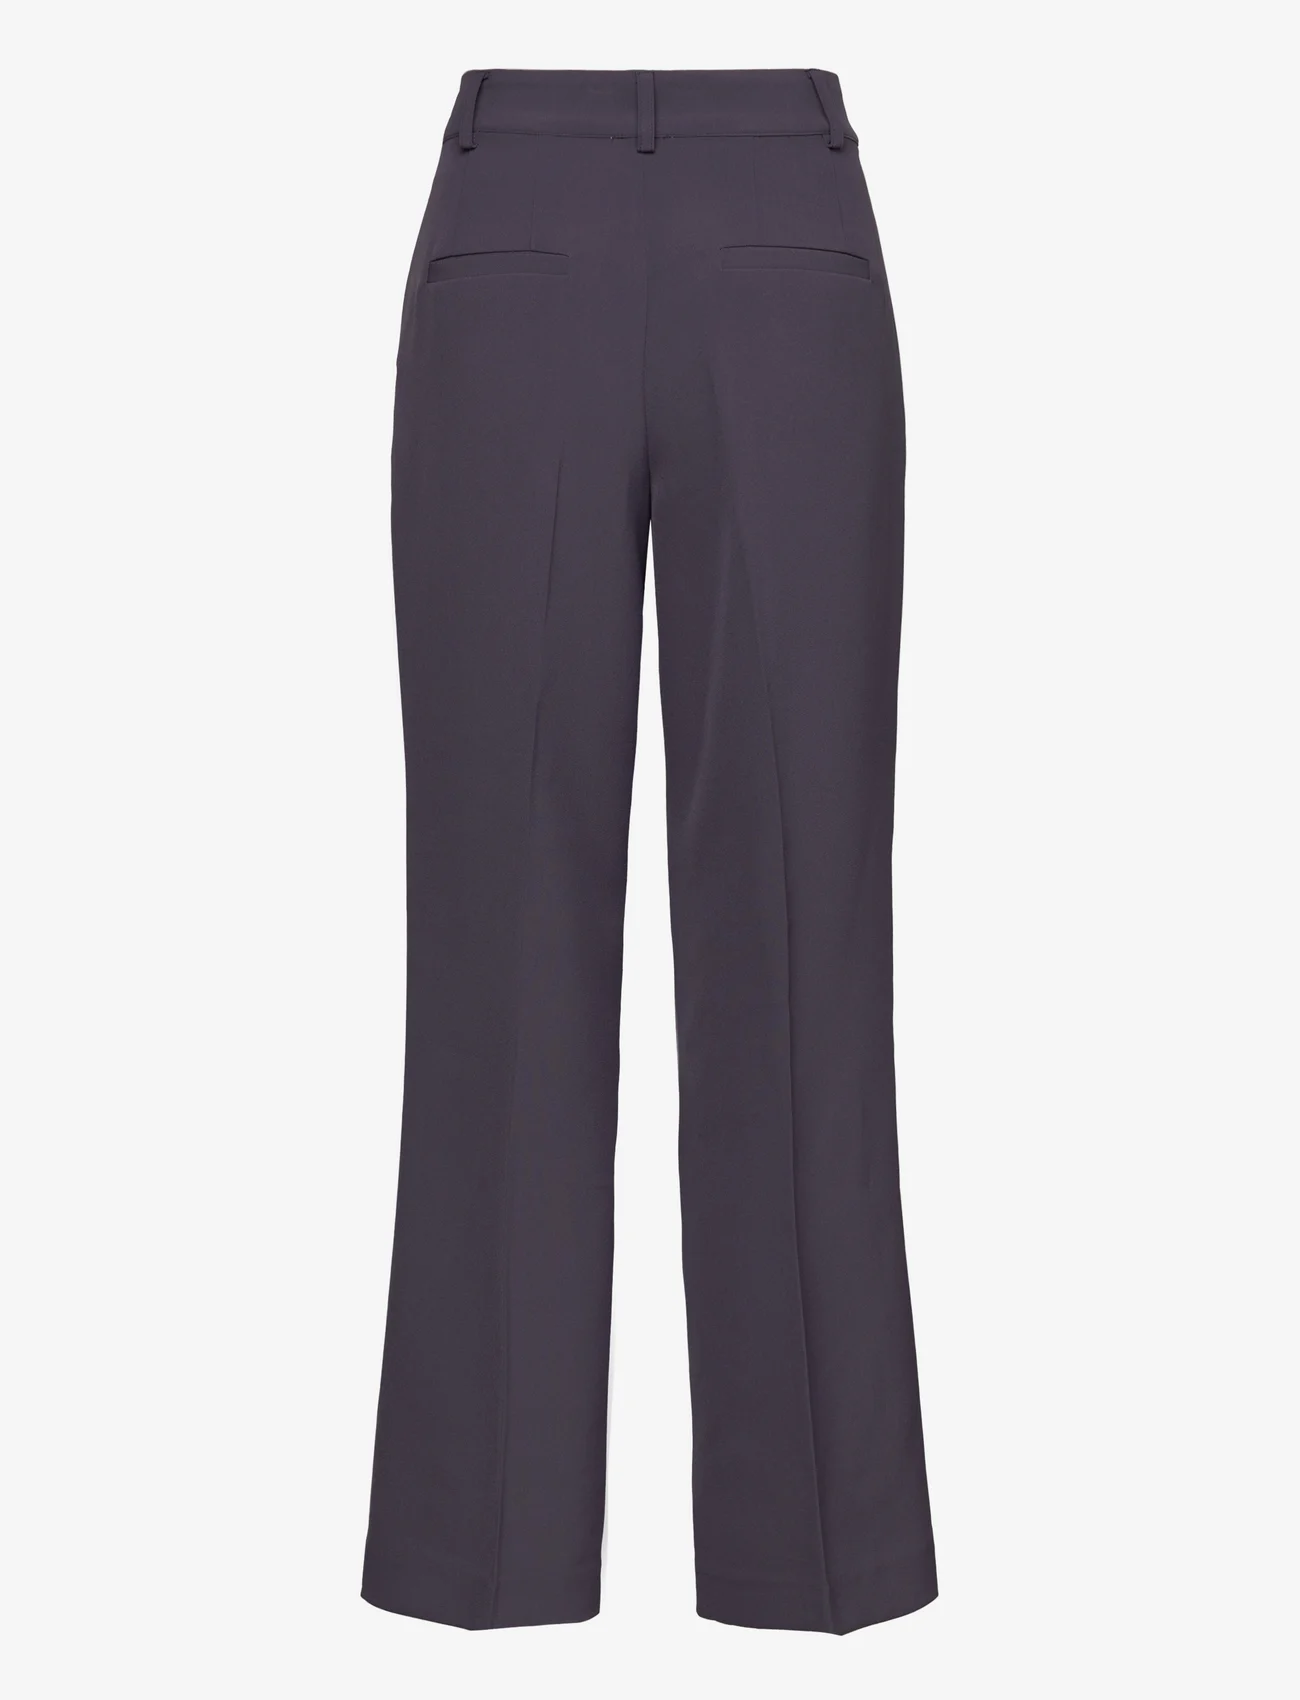 My Essential Wardrobe - 29 THE TAILORED PANT - tailored trousers - graystone - 1